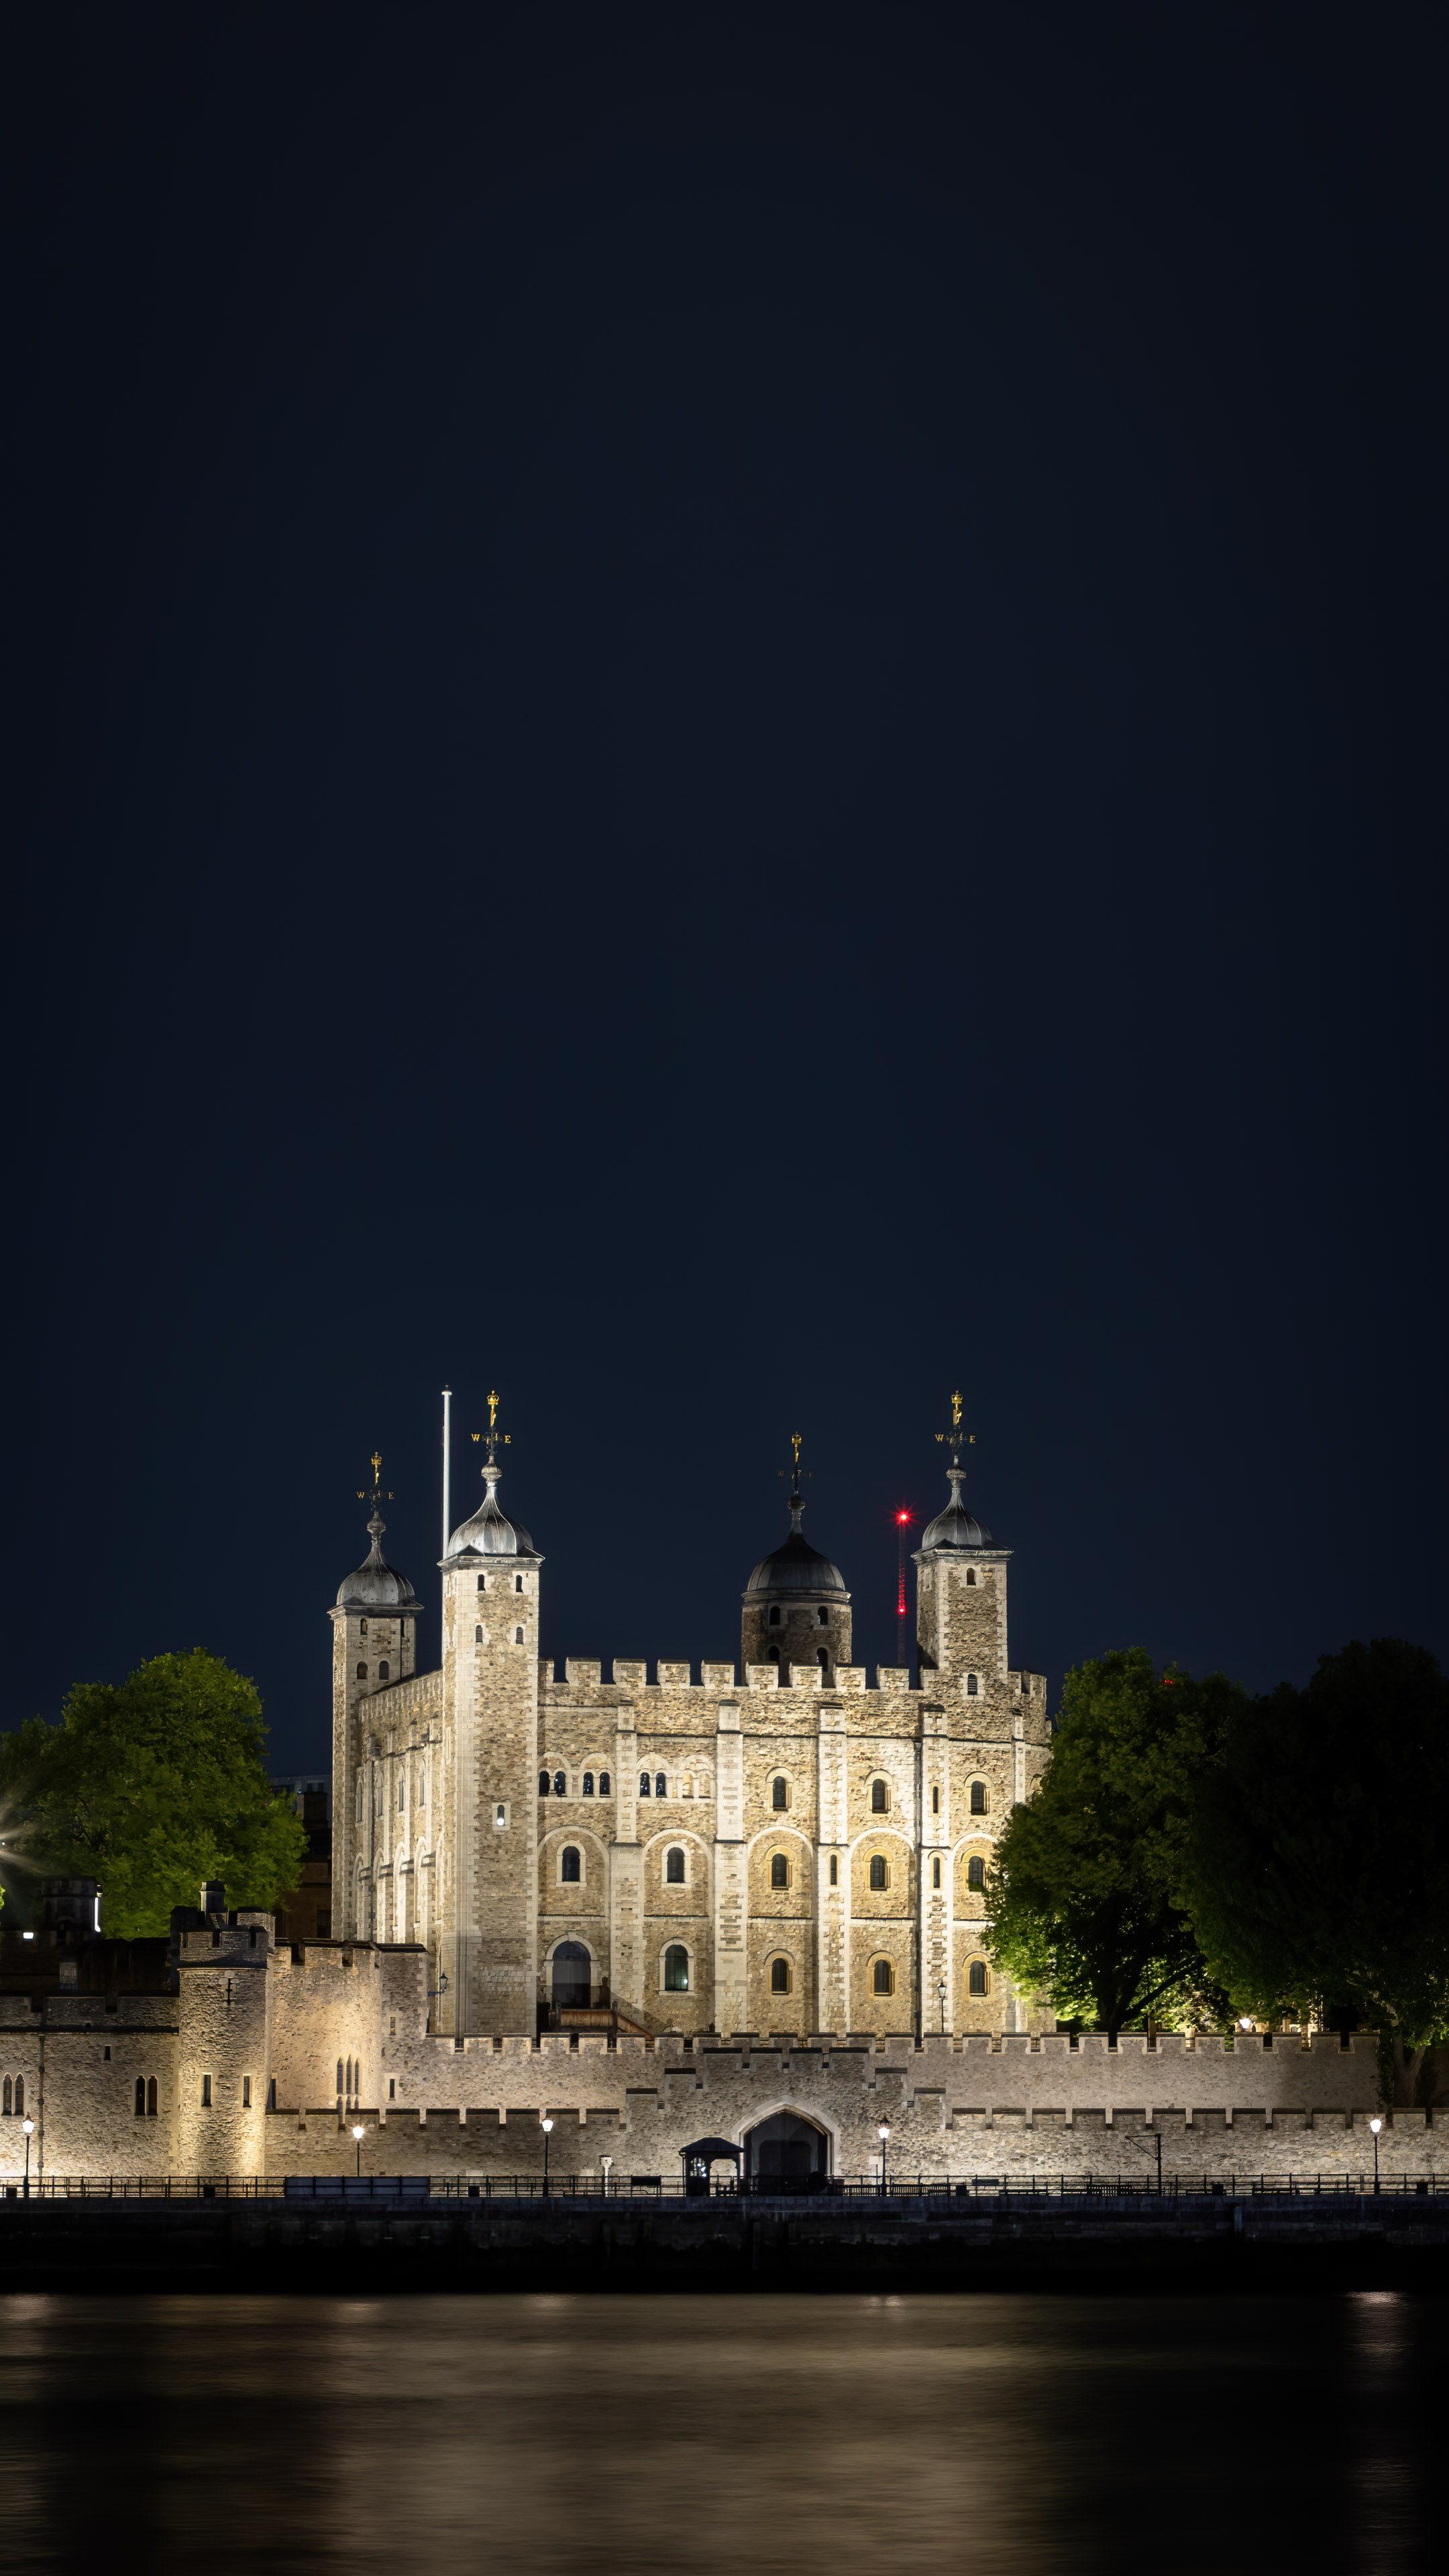 Bring the moodiness of London at night to your iPhone with this dark and atmospheric city wallpaper.